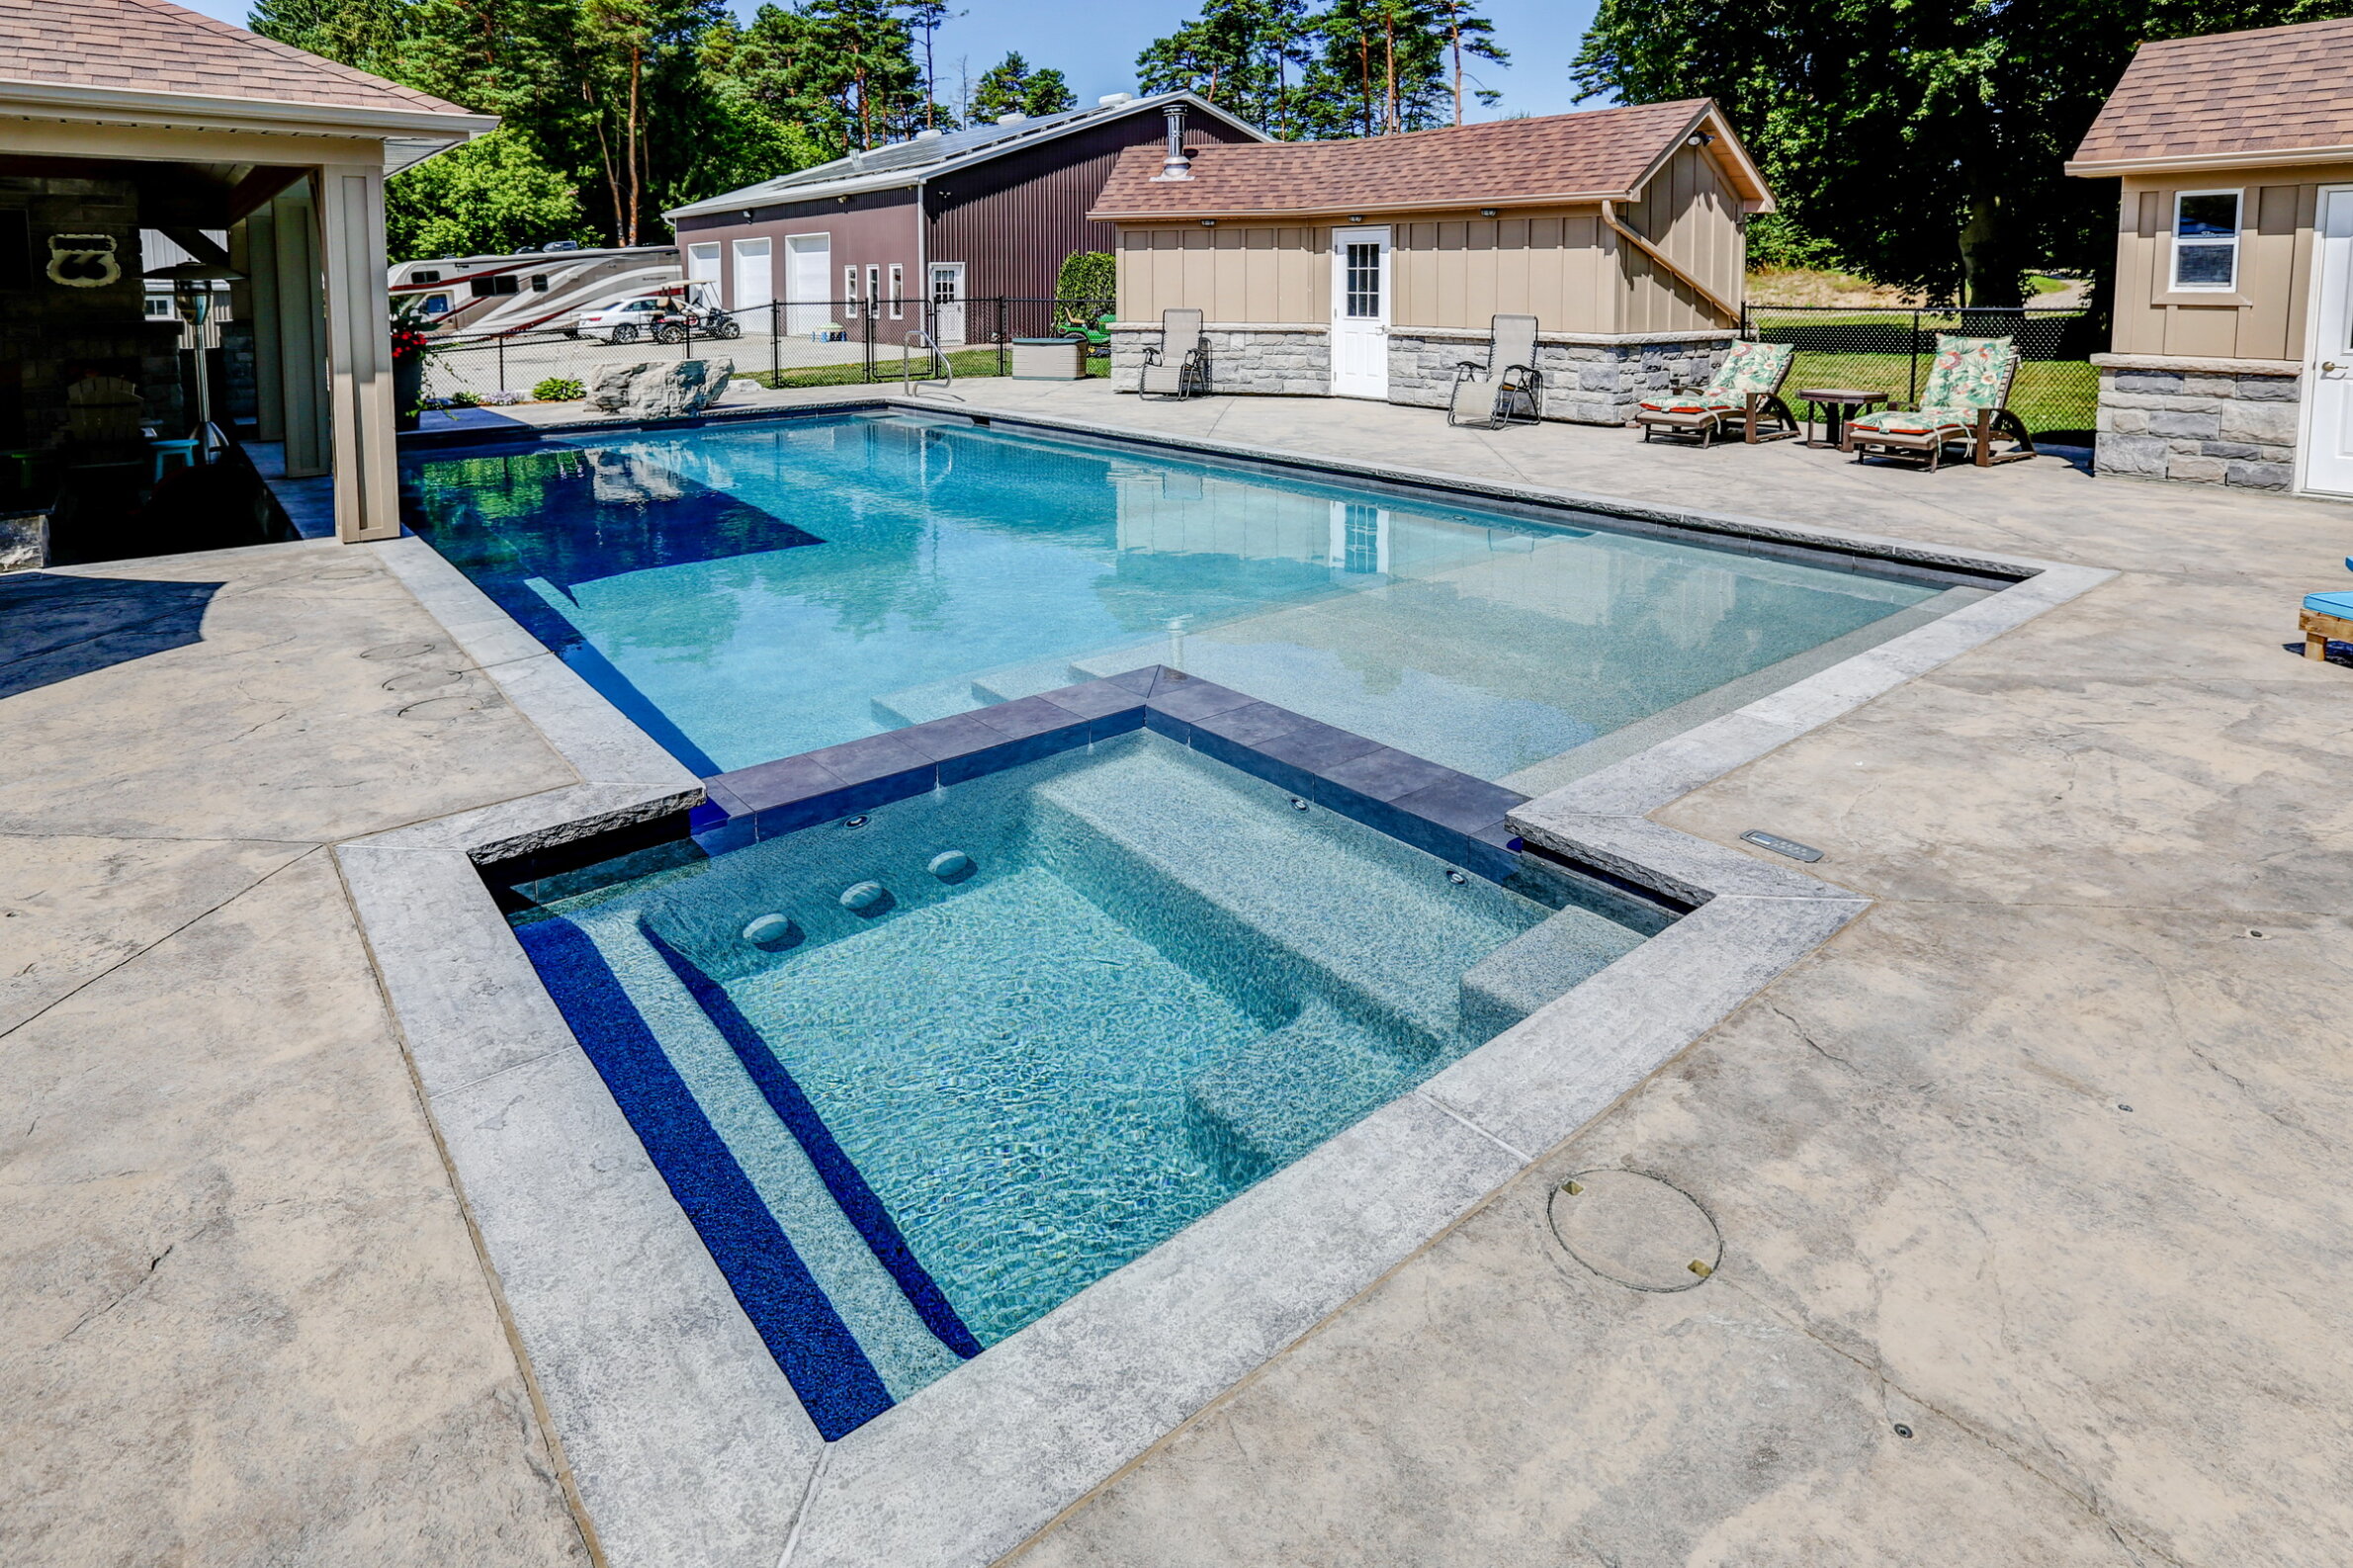 This image features a clear blue rectangular swimming pool with an integrated hot tub, surrounded by a concrete deck and buildings, on a sunny day.